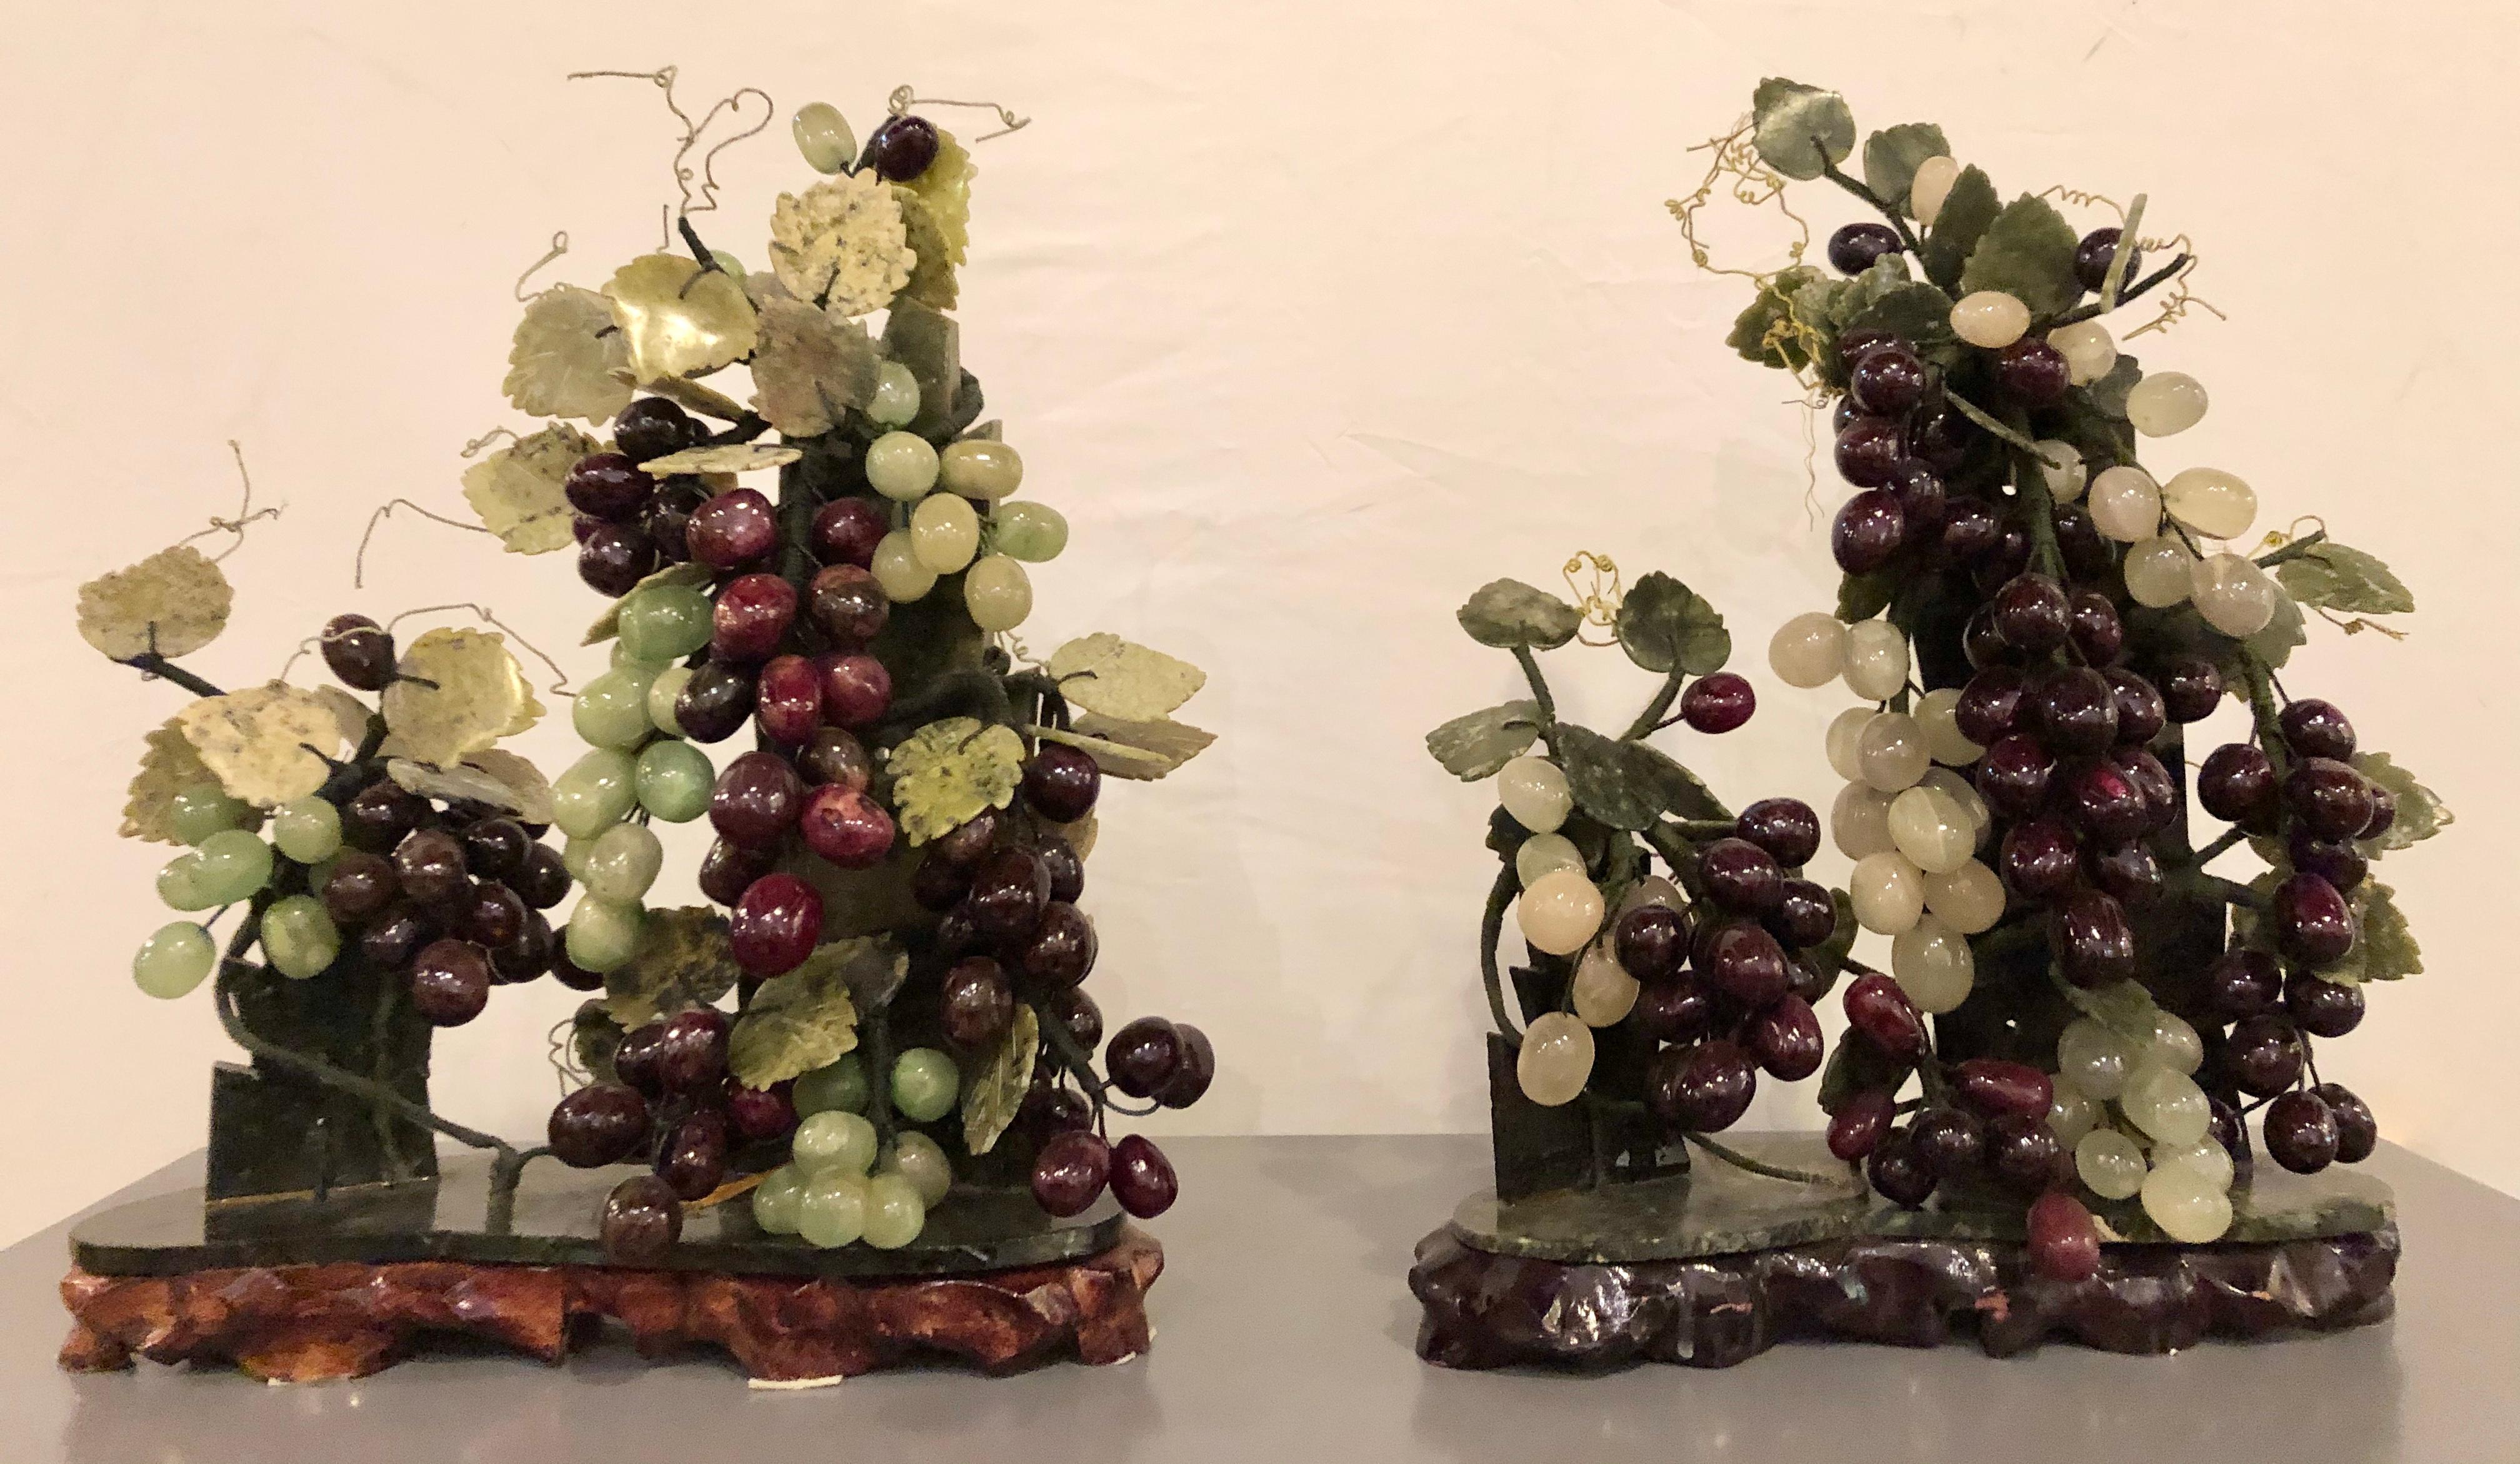 Pair of vintage jade and amethyst colored hard stone and glass group of grapes tableware each distinguished by having different color bases.